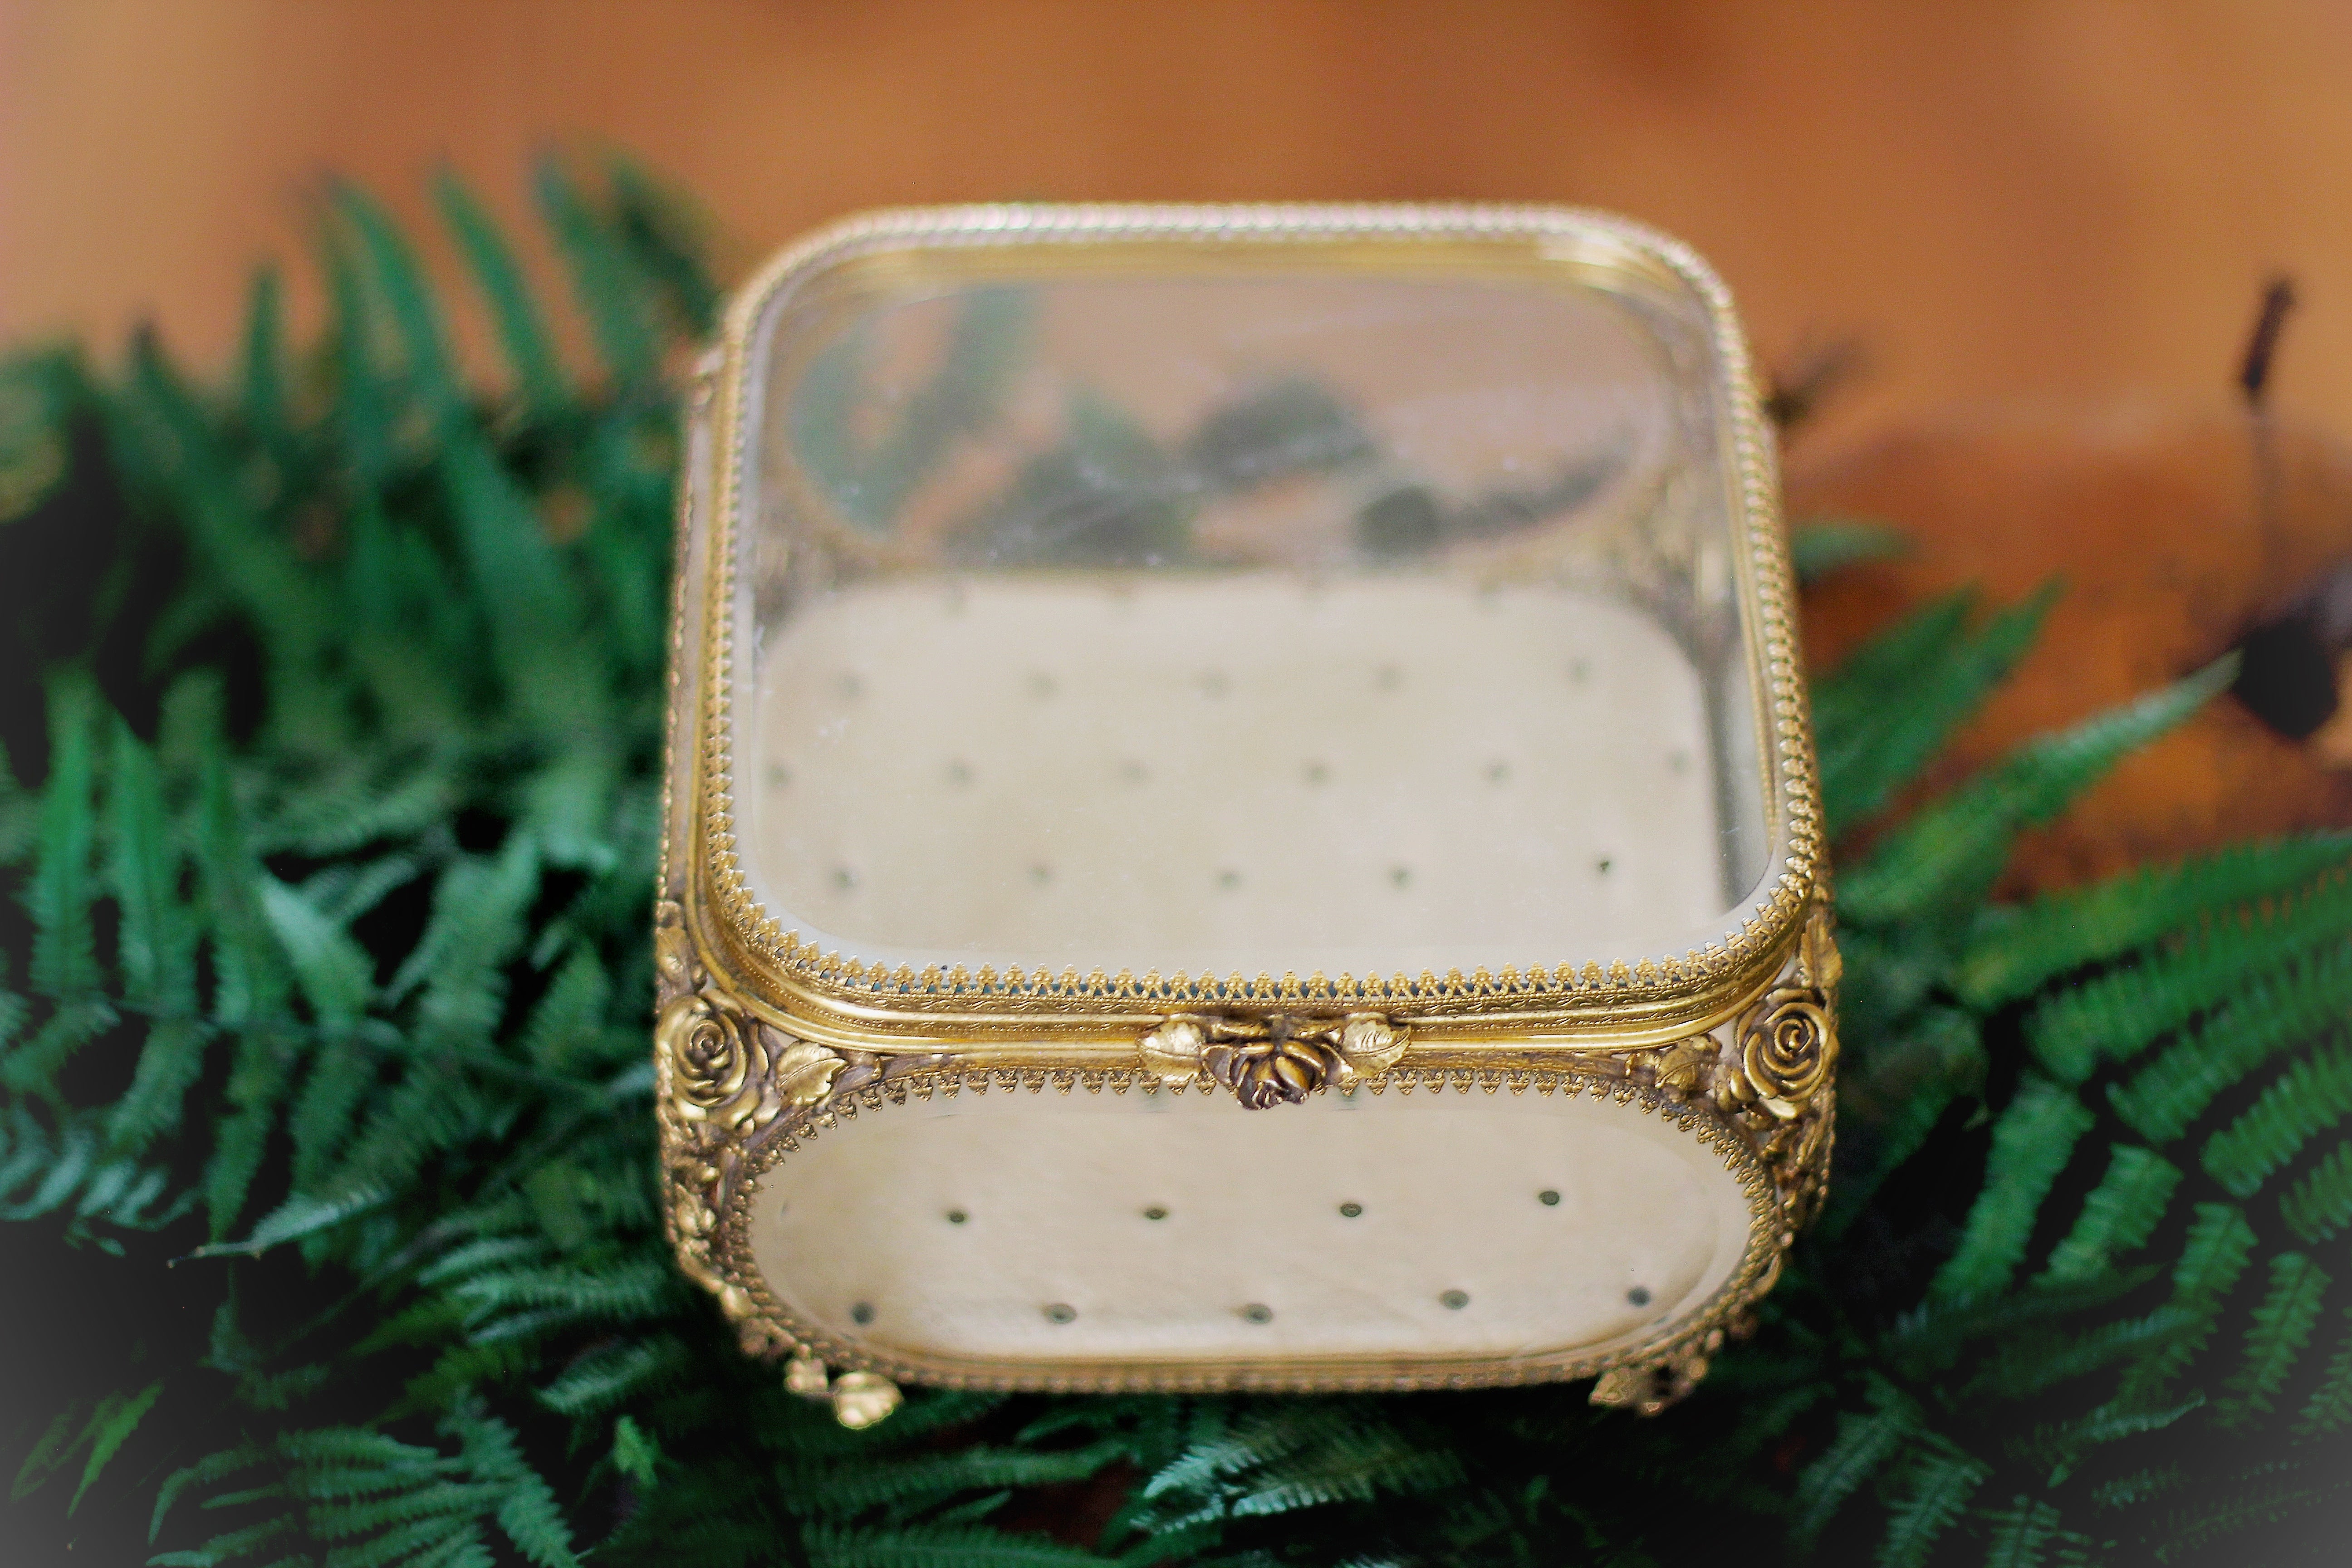 Antique Roses Tufted Jewelry Box